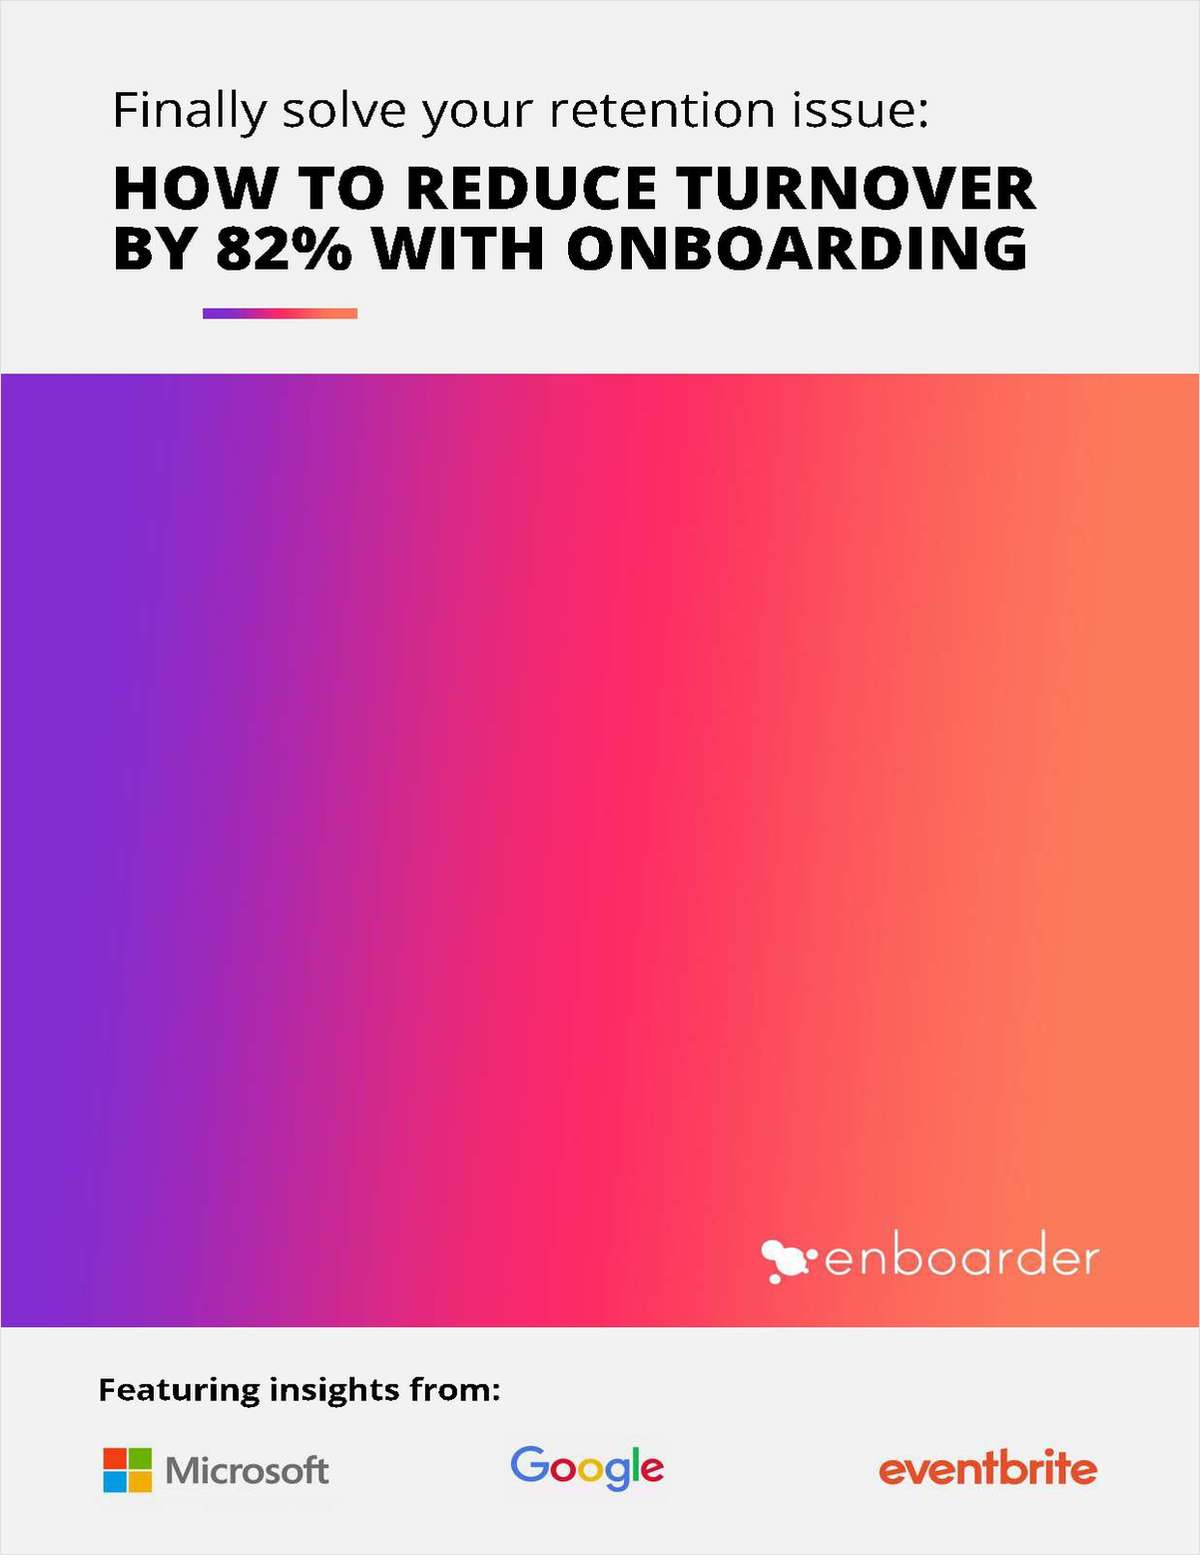 Finally Solve Your Retention Issue: How to Reduce Turnover by 82% with Onboarding